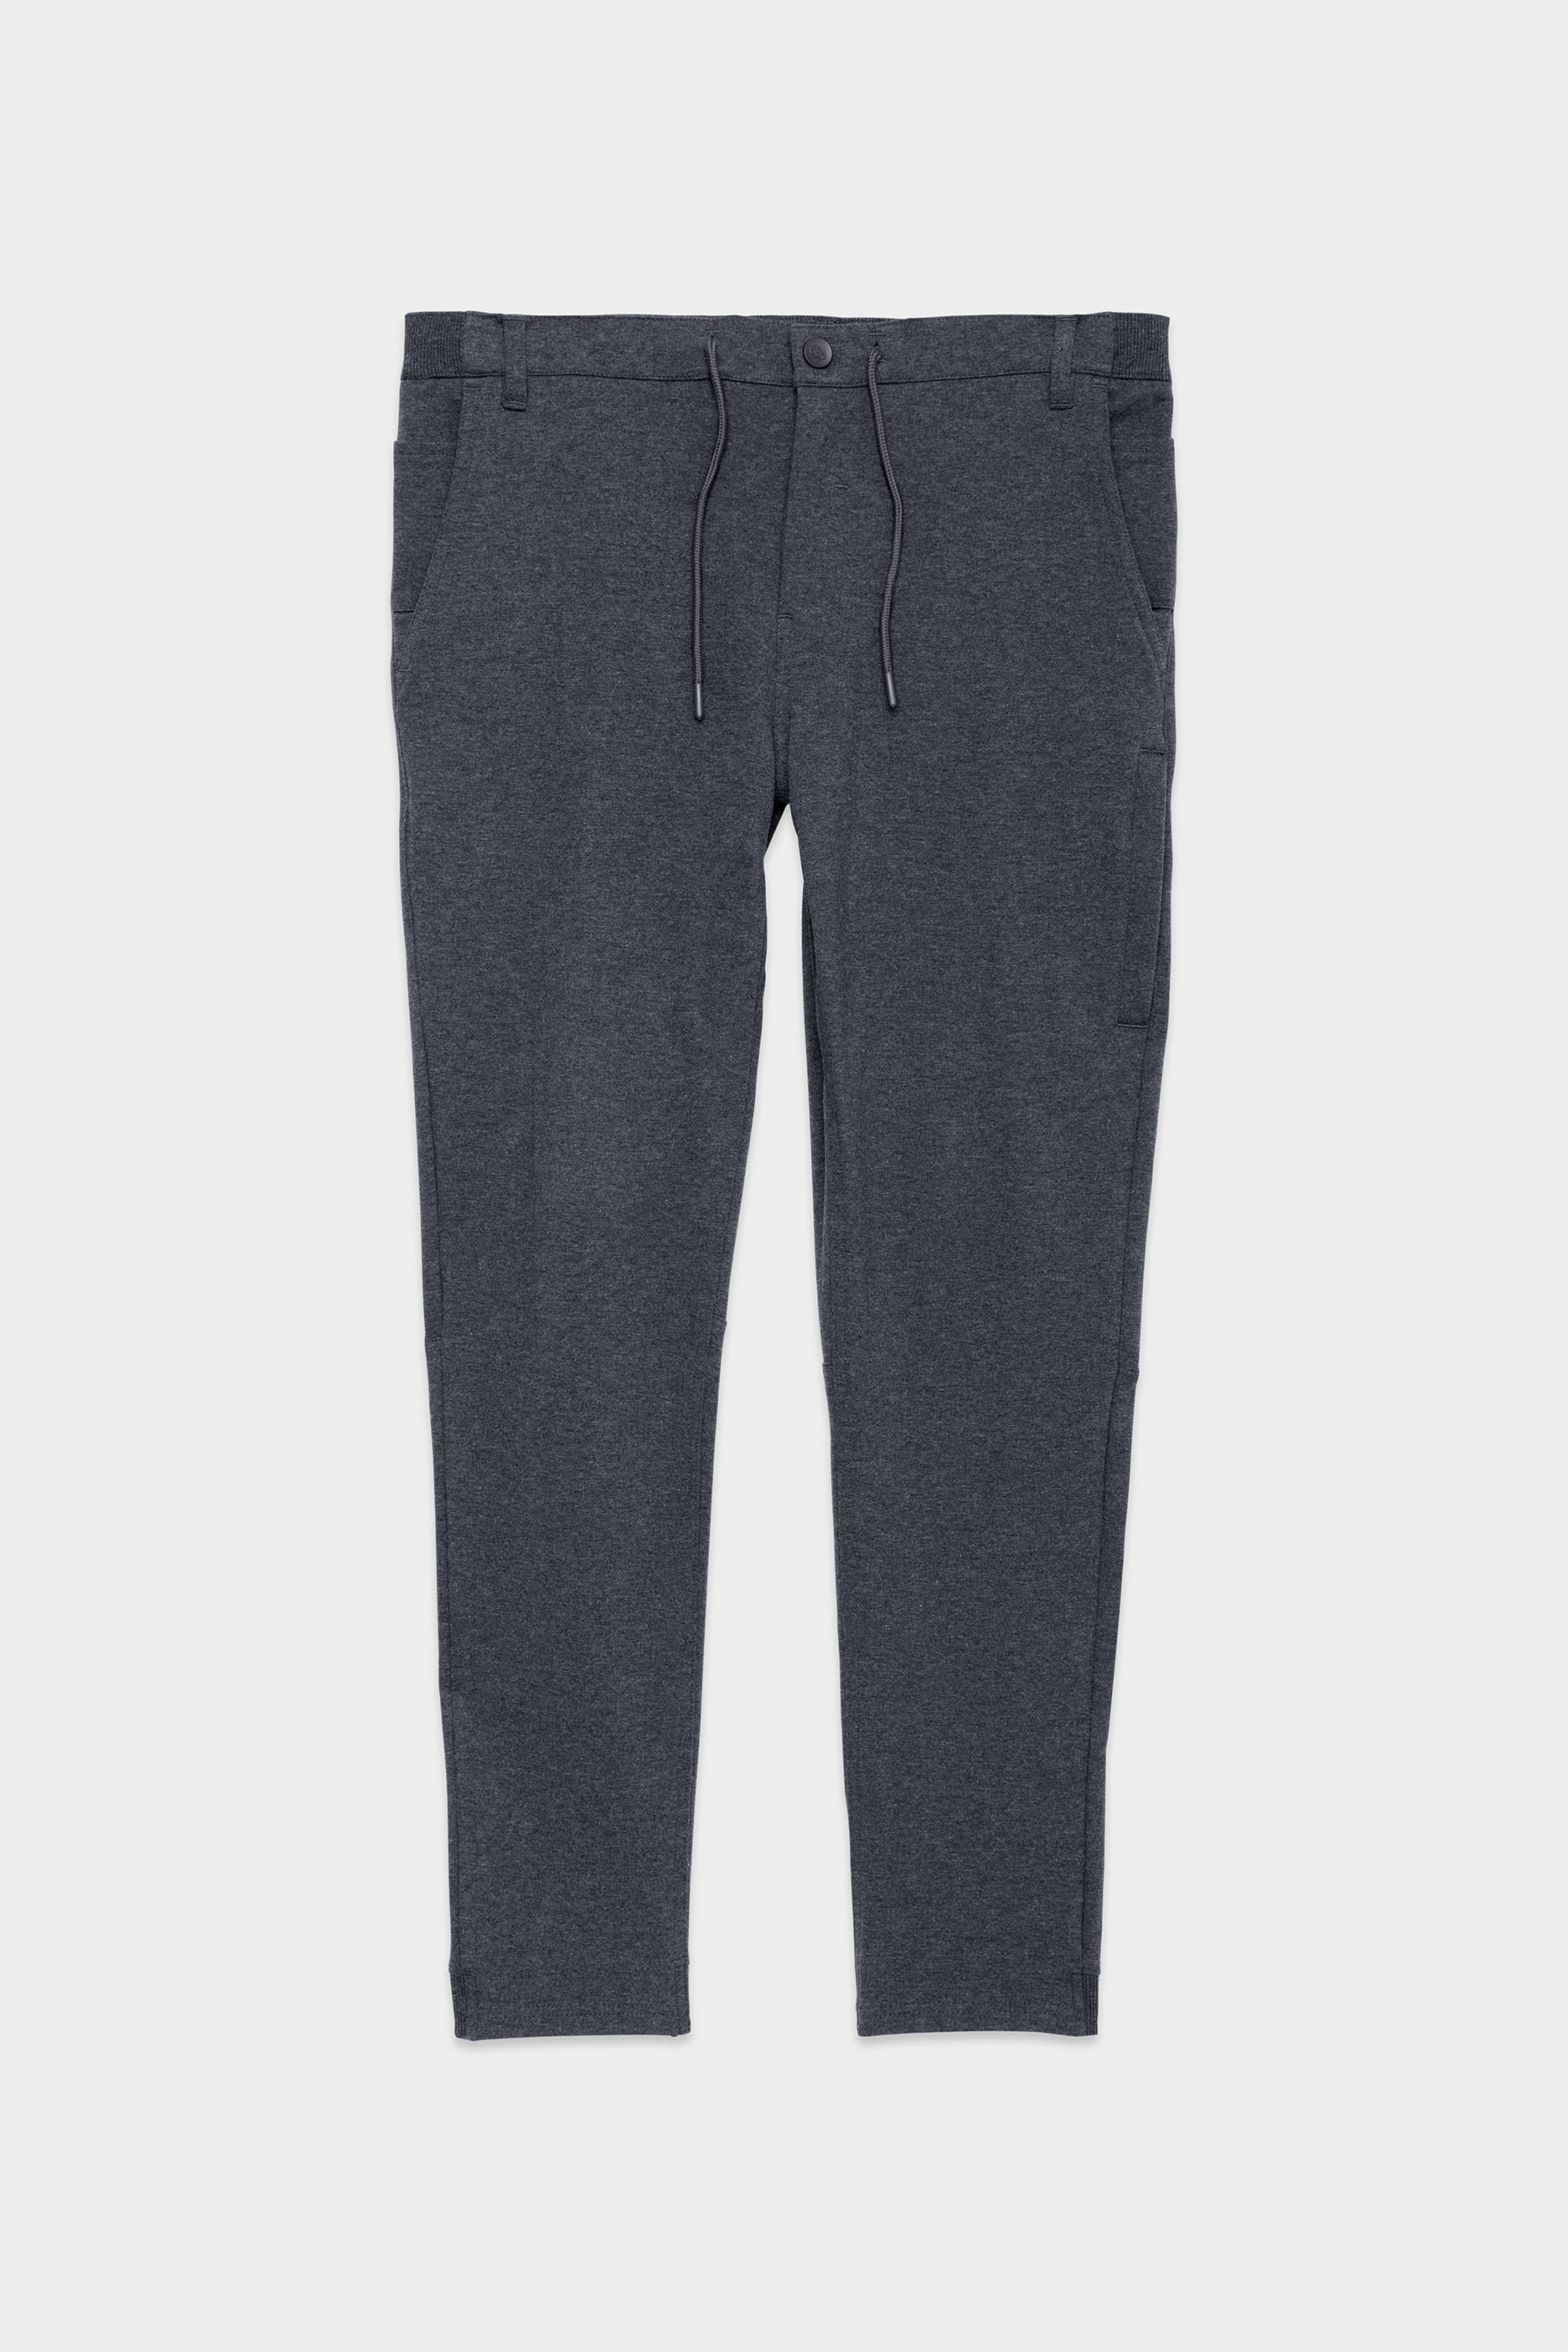 Alternate View 18 of 686 Men's Everywhere Double Knit Pant